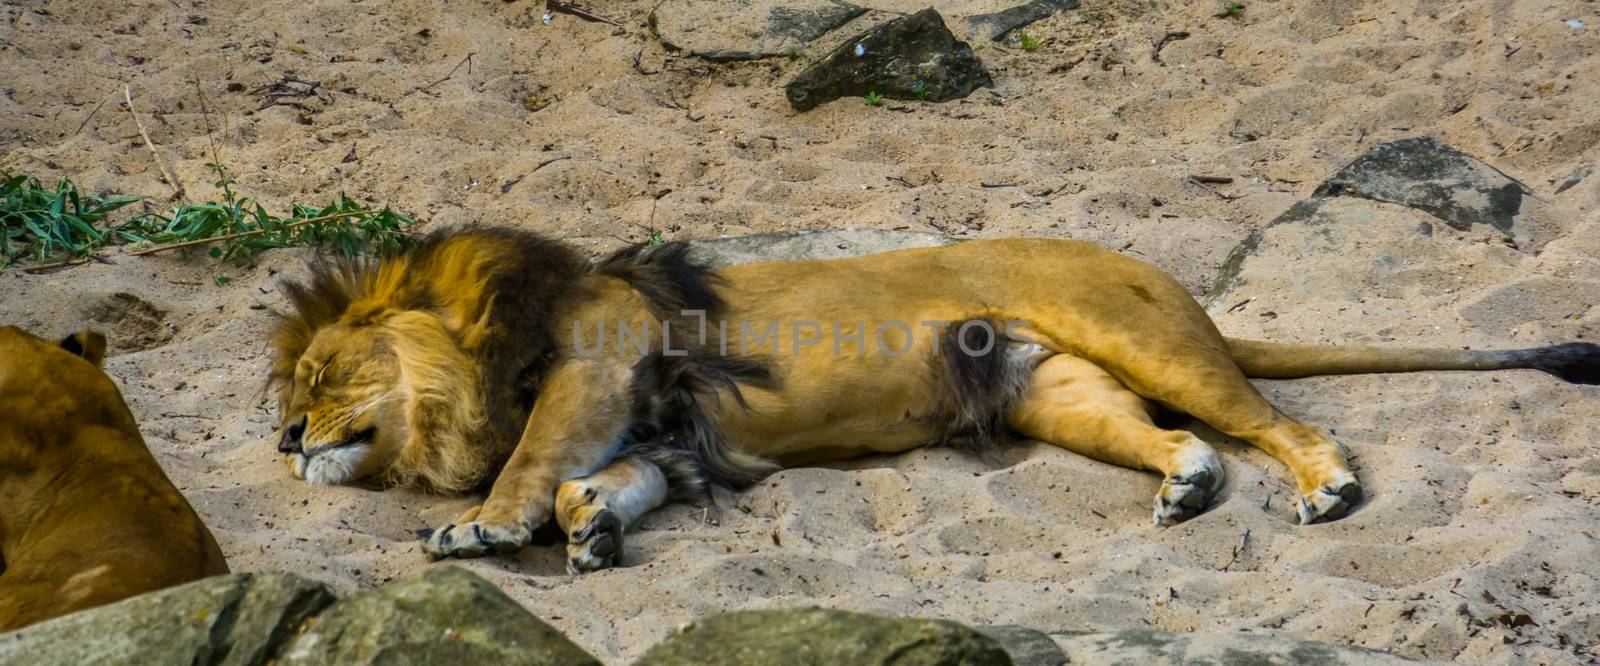 adult male lion sleeping in the sand, tropical wild cat from Africa